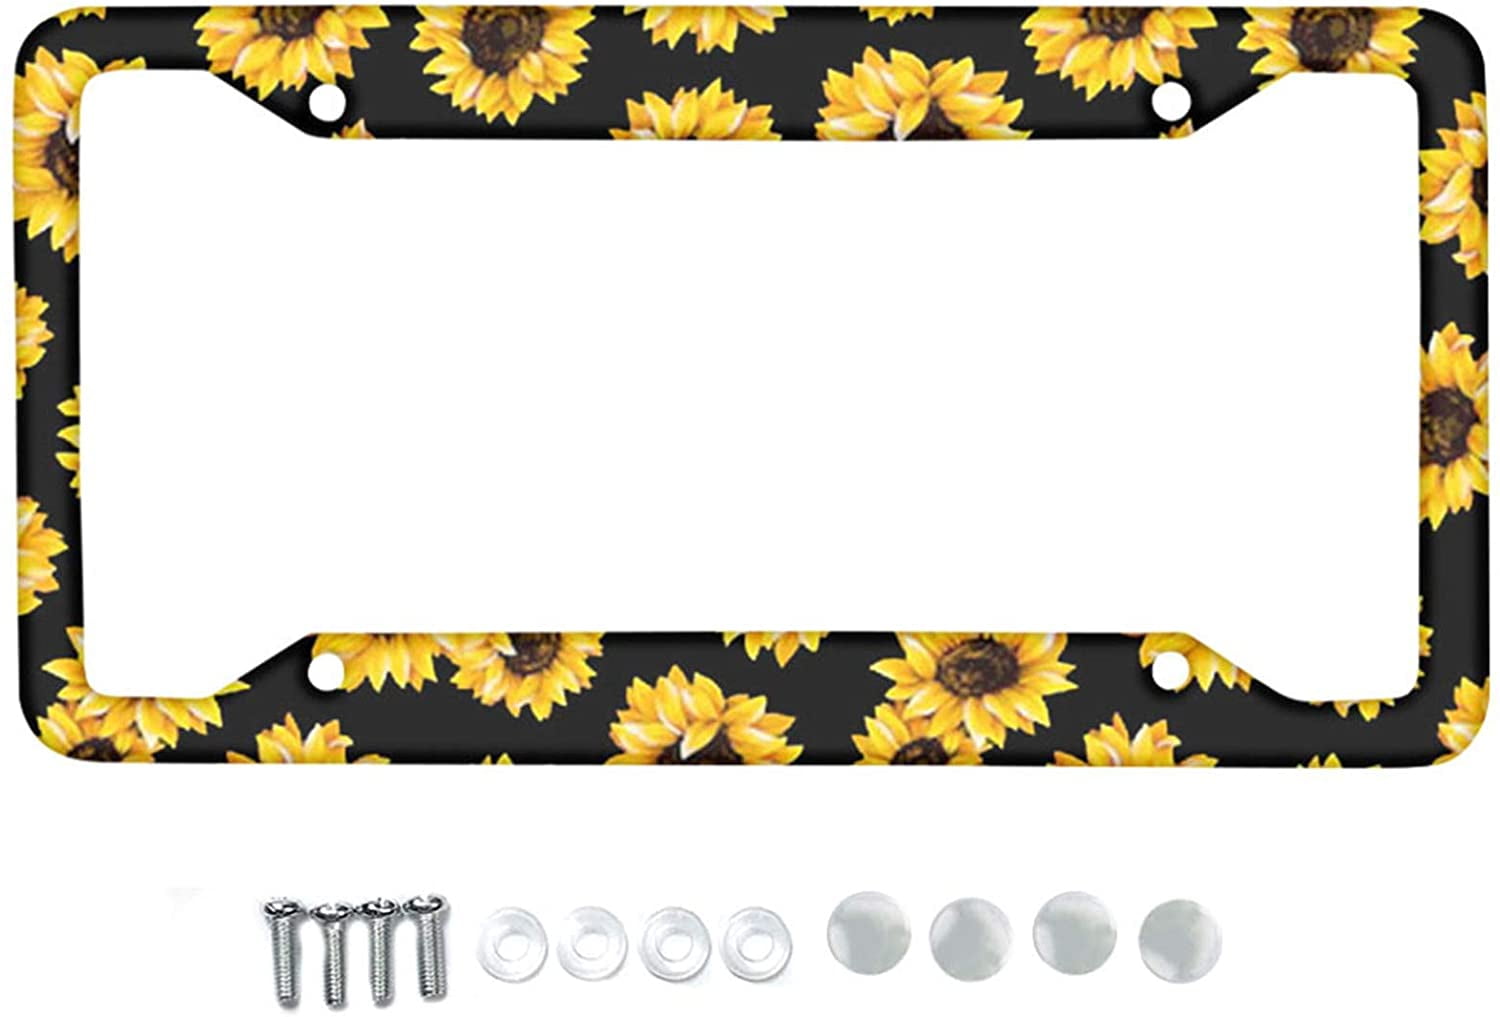 Tobe Yours License Plate Cover Life is Good Sunflower Printed Auto Truck Car Front Tag Metal License Plate Frame Cover 6x12 